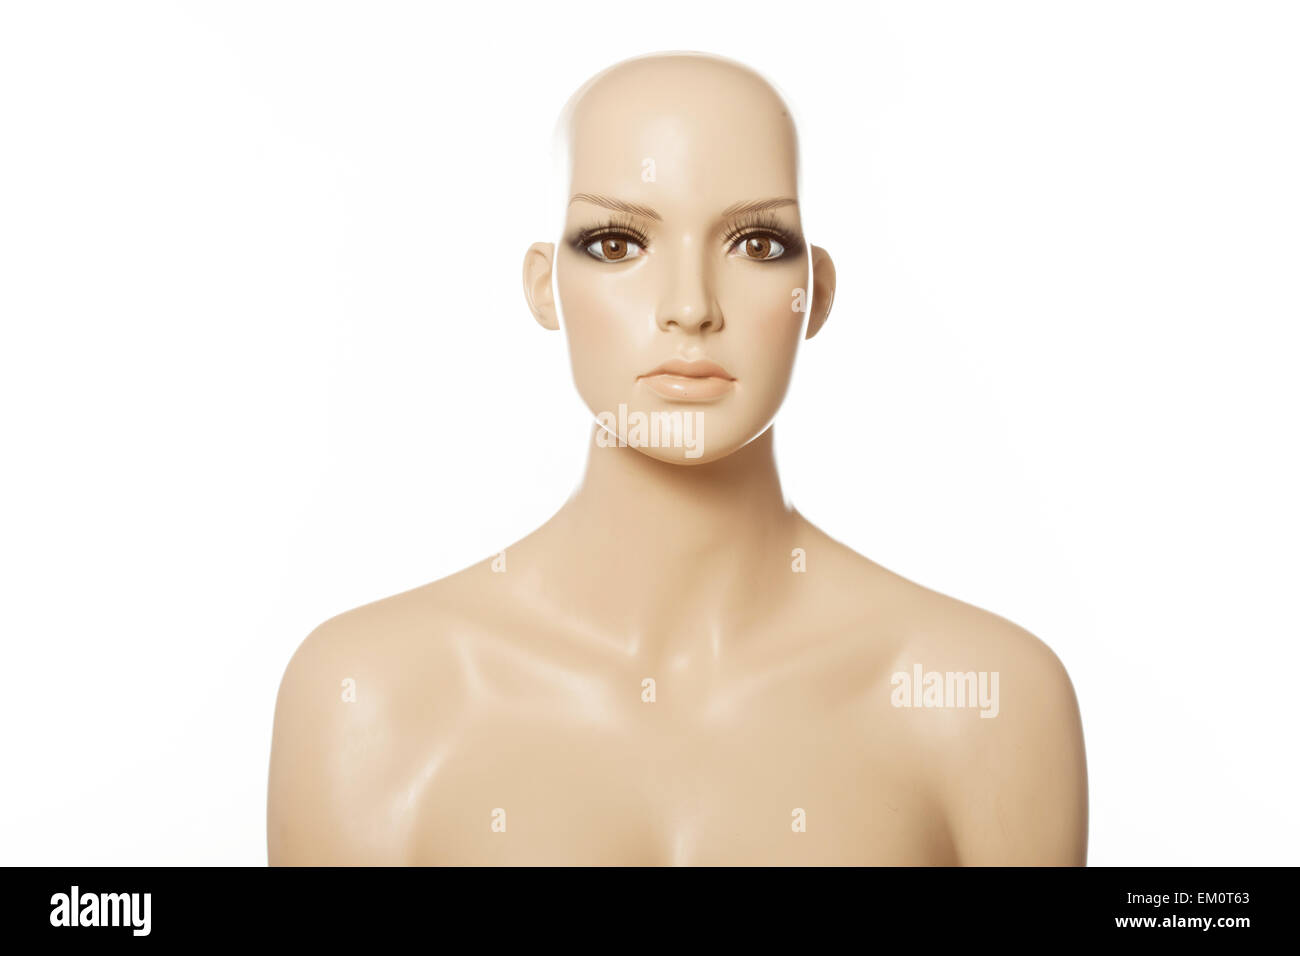 Head of a female mannequin face Stock Photo - Alamy